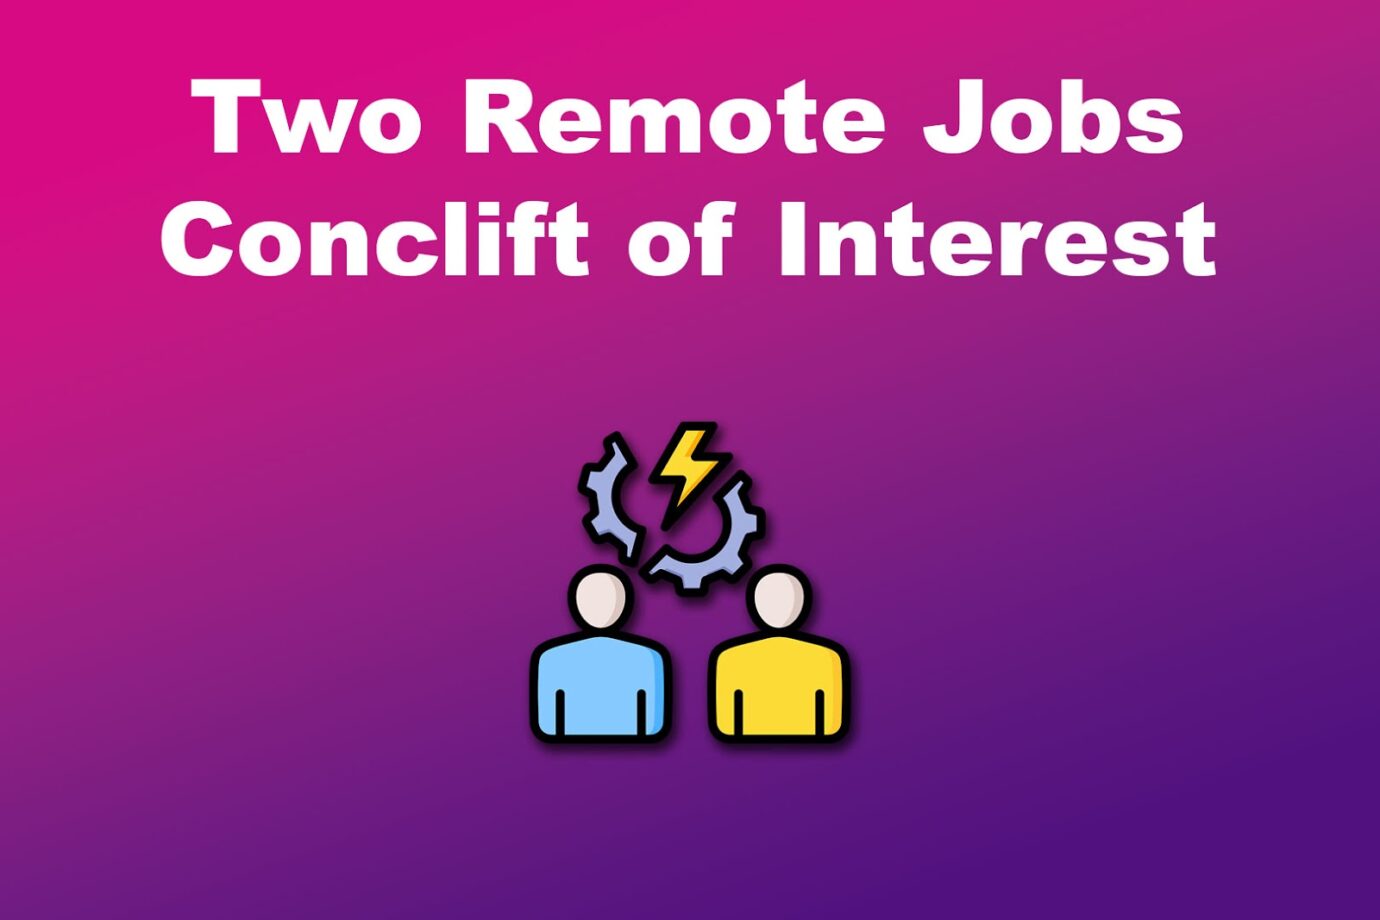 Two Remote Jobs Conclift of Interest